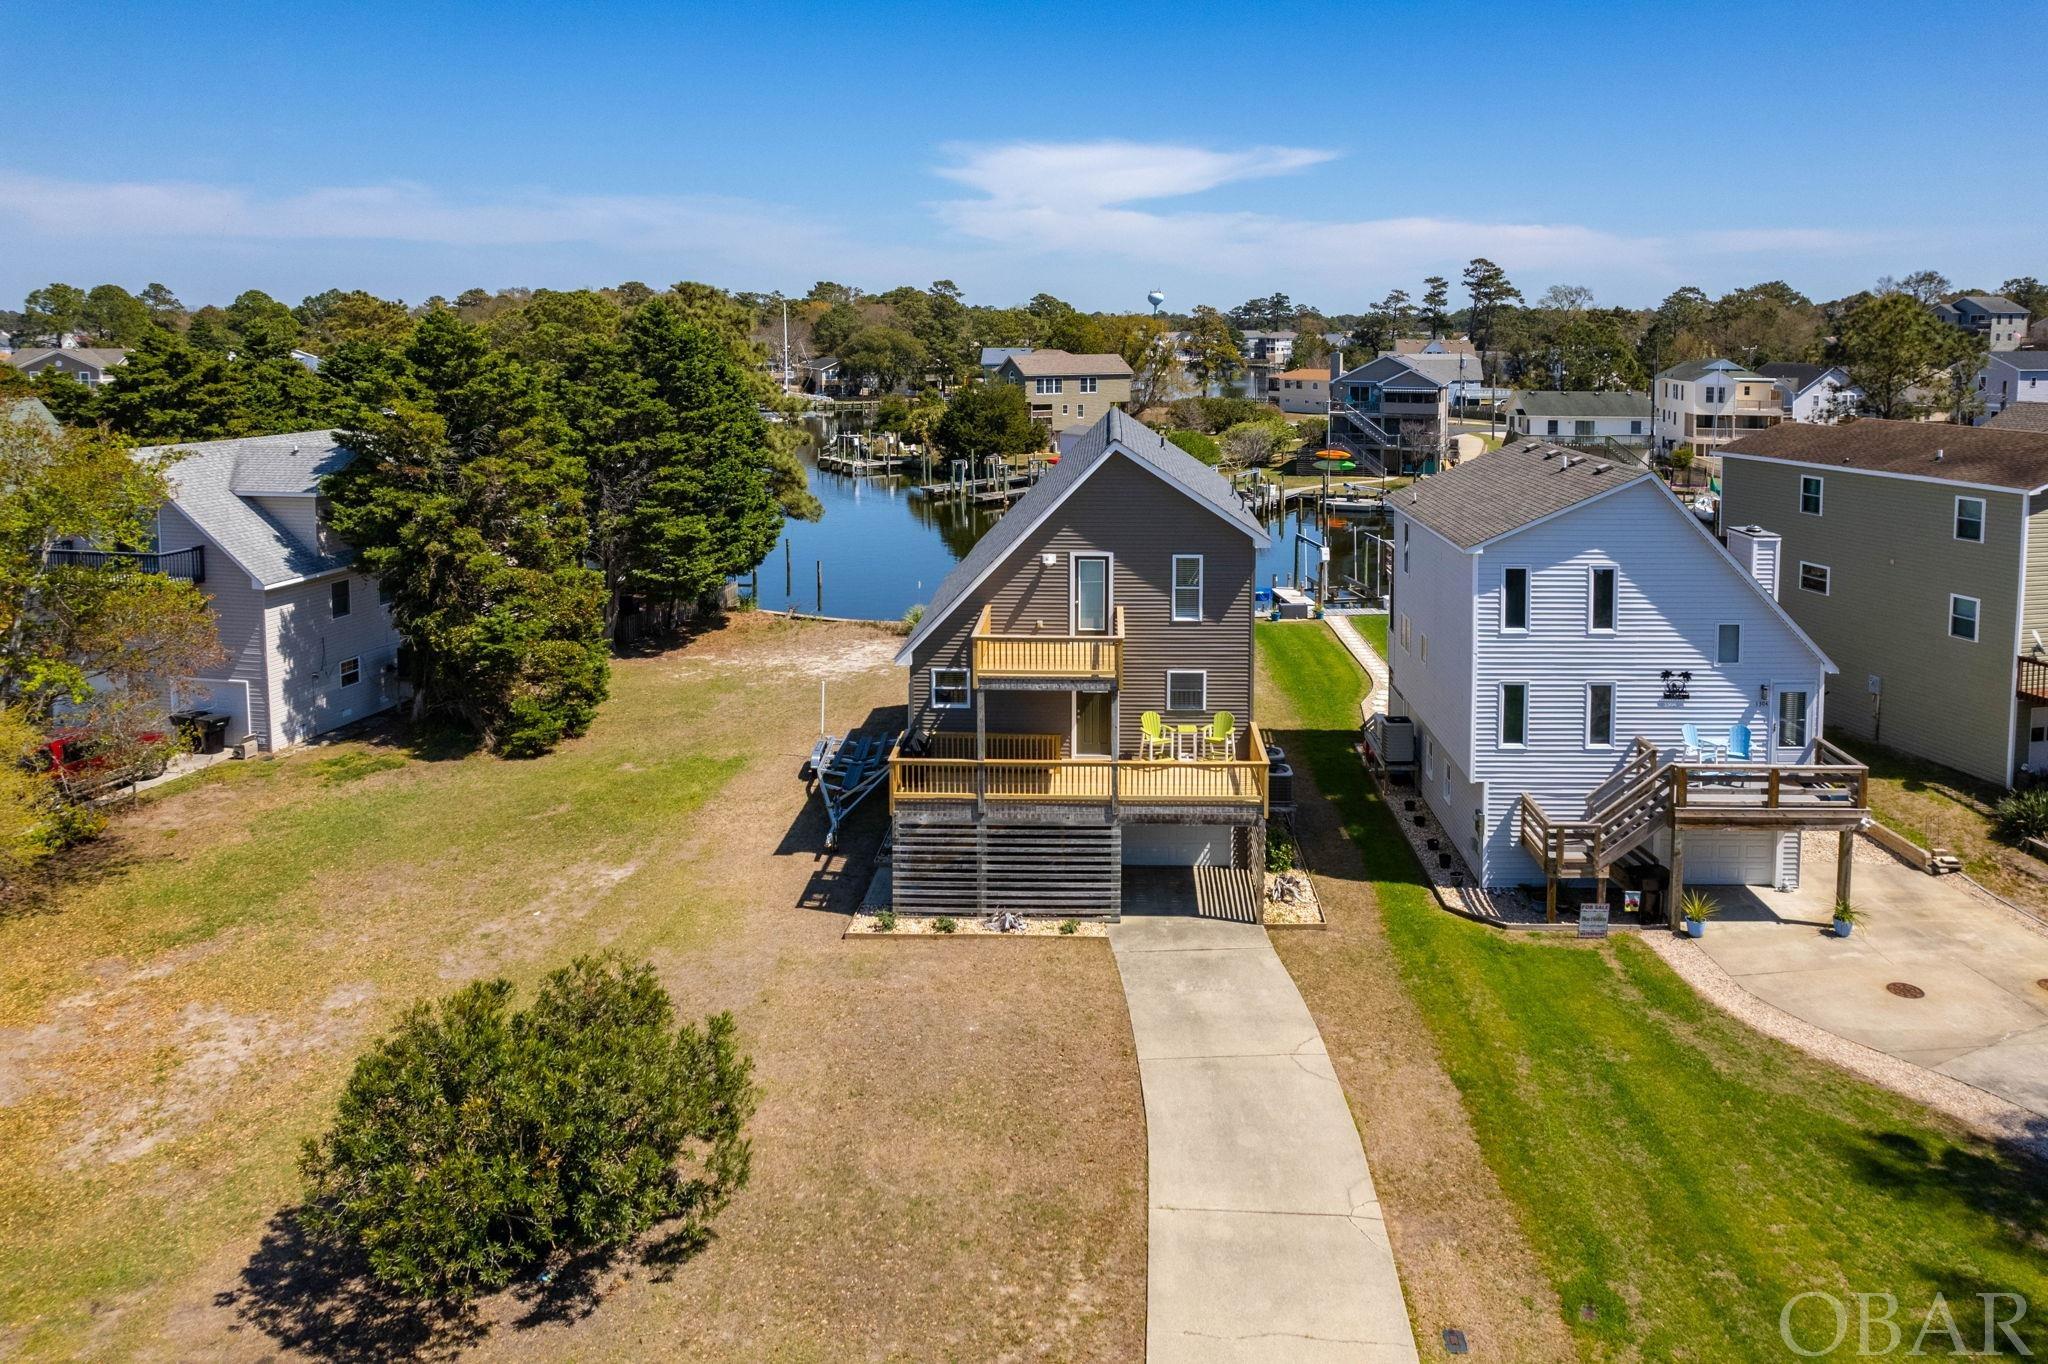 **MOVE IN READY** The best of both worlds for Water Views and Sunset Views. This Waterfront property faces east on the canal side with 2 story sun decks and faces west towards the Albemarle Sound with 2 story sun decks as well. So take your pick and sit back to relax and enjoy the views. Top Quality Renovations have been made throughout by the current seller and are too numerous to list. The attention to detail shows. Ask for the complete renovation list or view in the associated docs. You will not be disappointed with this updated and renovated 3 bedroom 2 bath waterfront home. The large ground floor garage and storage area has ample room for all your watersports equipment and beach gear storage. Plus, there is a dry entry as well to make coming home on those rainy days a little easier. Please note, water side deck renovations are still in progress with new railings and decking being installed.  Located in a 24 hour 7 day a week gated waterfront boating community with numerous amenities. The Community Amenities are: waterfront outdoor pool, covered pavilion, pool side tables with umbrellas, sun deck, pool lounge chairs, clubhouse, sound side beach with park, playground, bath house, boat ramp, marina, docks, dog park, and basketball court. Nearby, is a community favorite secret sound side beach for finding great pieces of driftwood. Call to schedule your showing of this beauty. Sold Furnished with a few exclusions. See the Associated Documents for Information. The boat shown on lift is also available for sale, but not included. Heated Sq. Ft. Measurements are for information purposes and to be confirmed by buyers agent